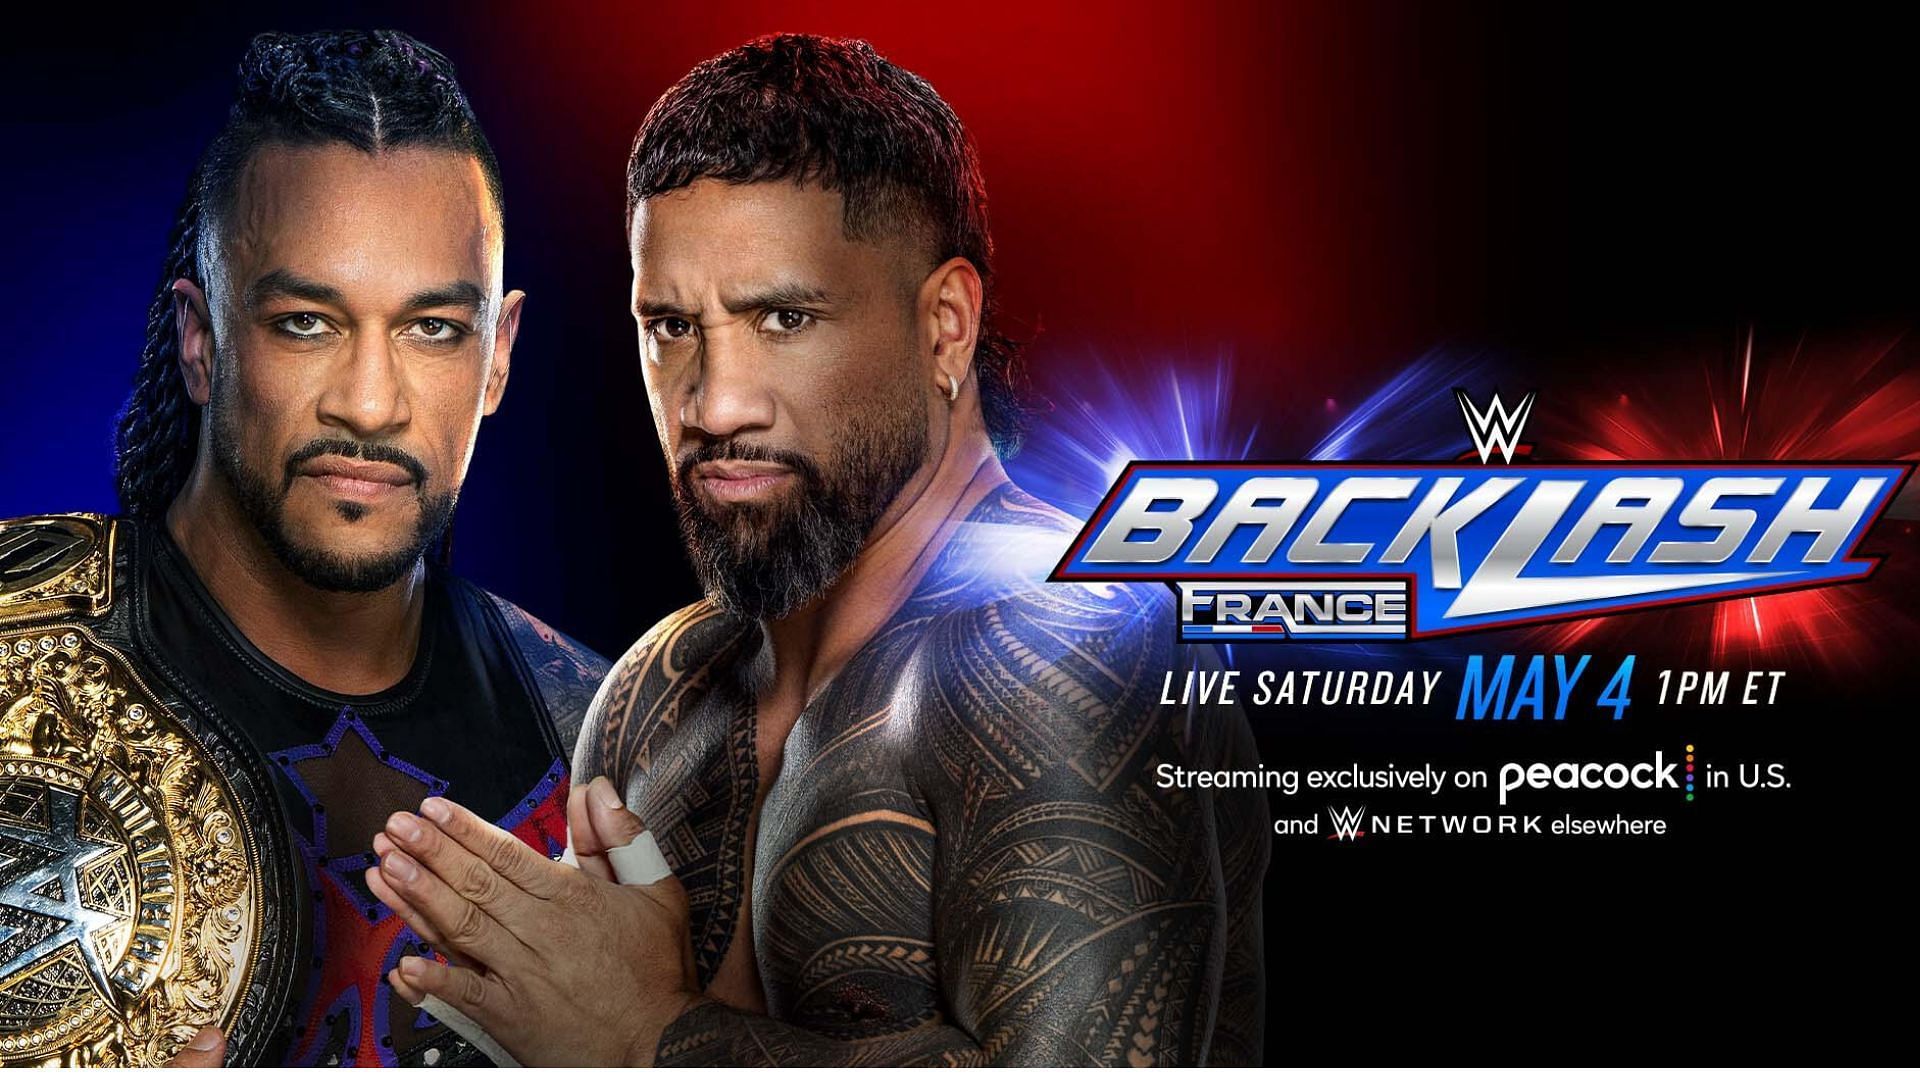 Damian Priest will take on Jey Uso at Backlash France.